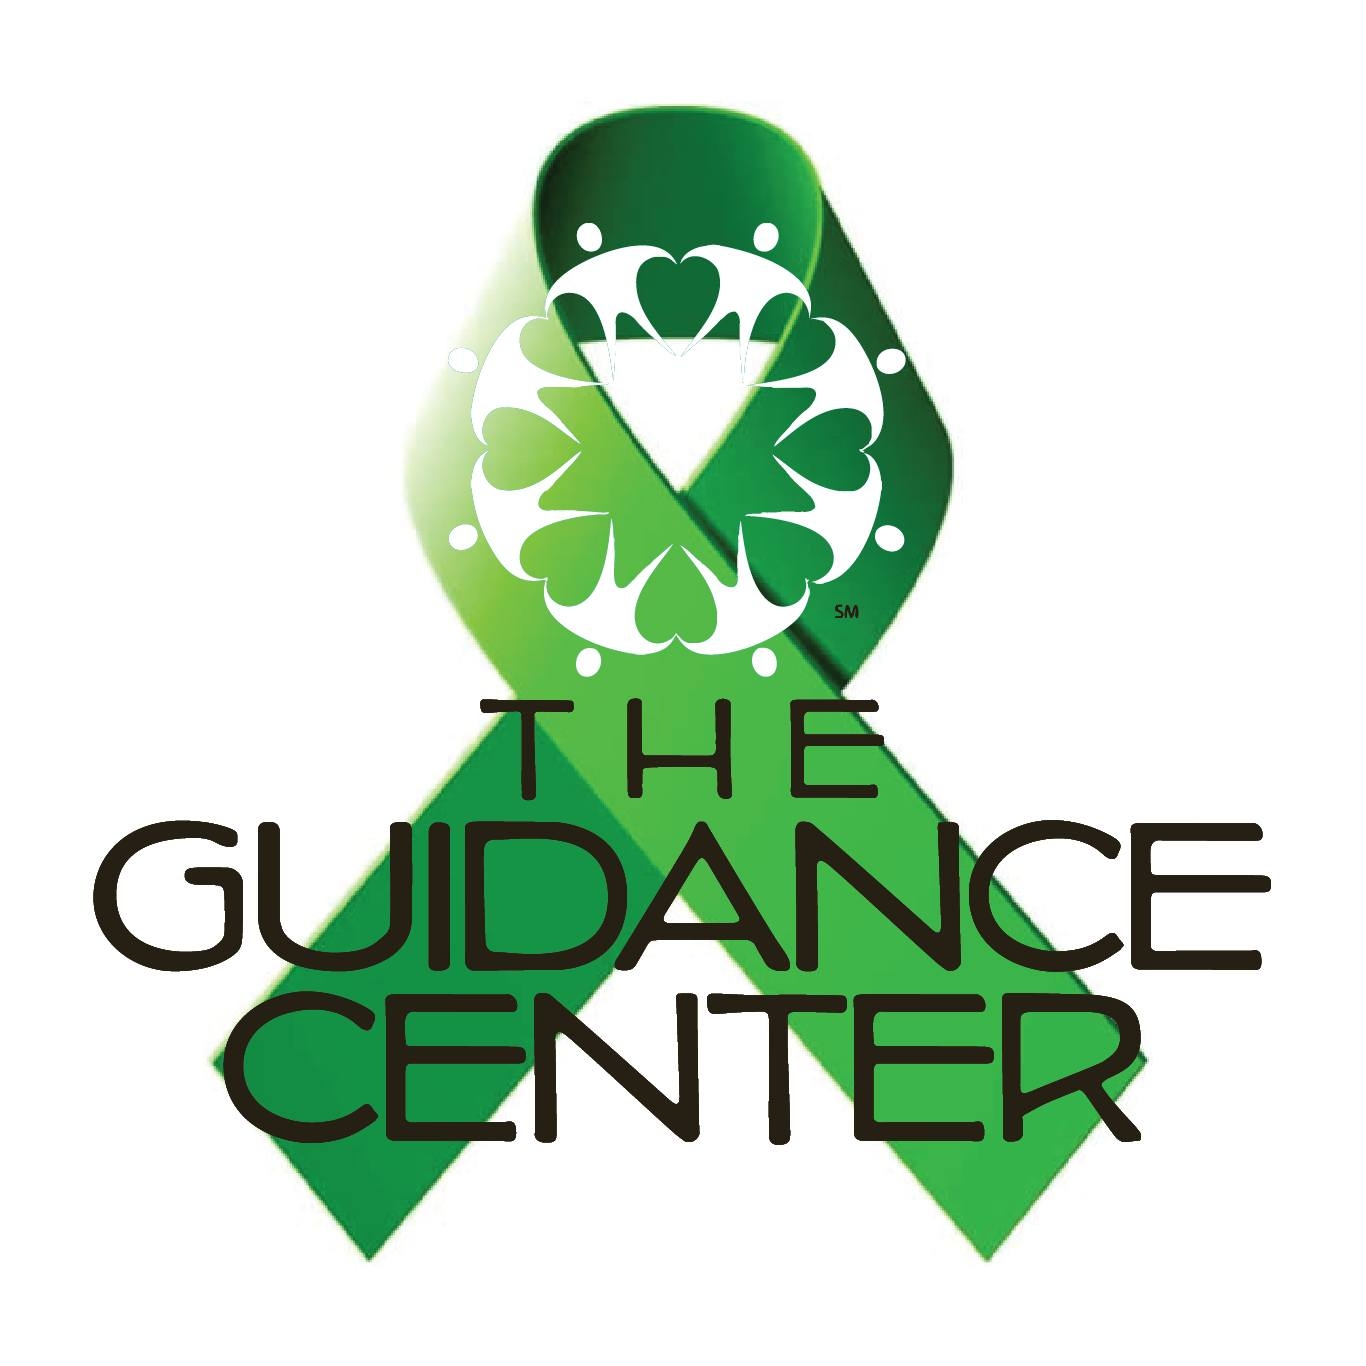 Guidance Center Adult and Family Services